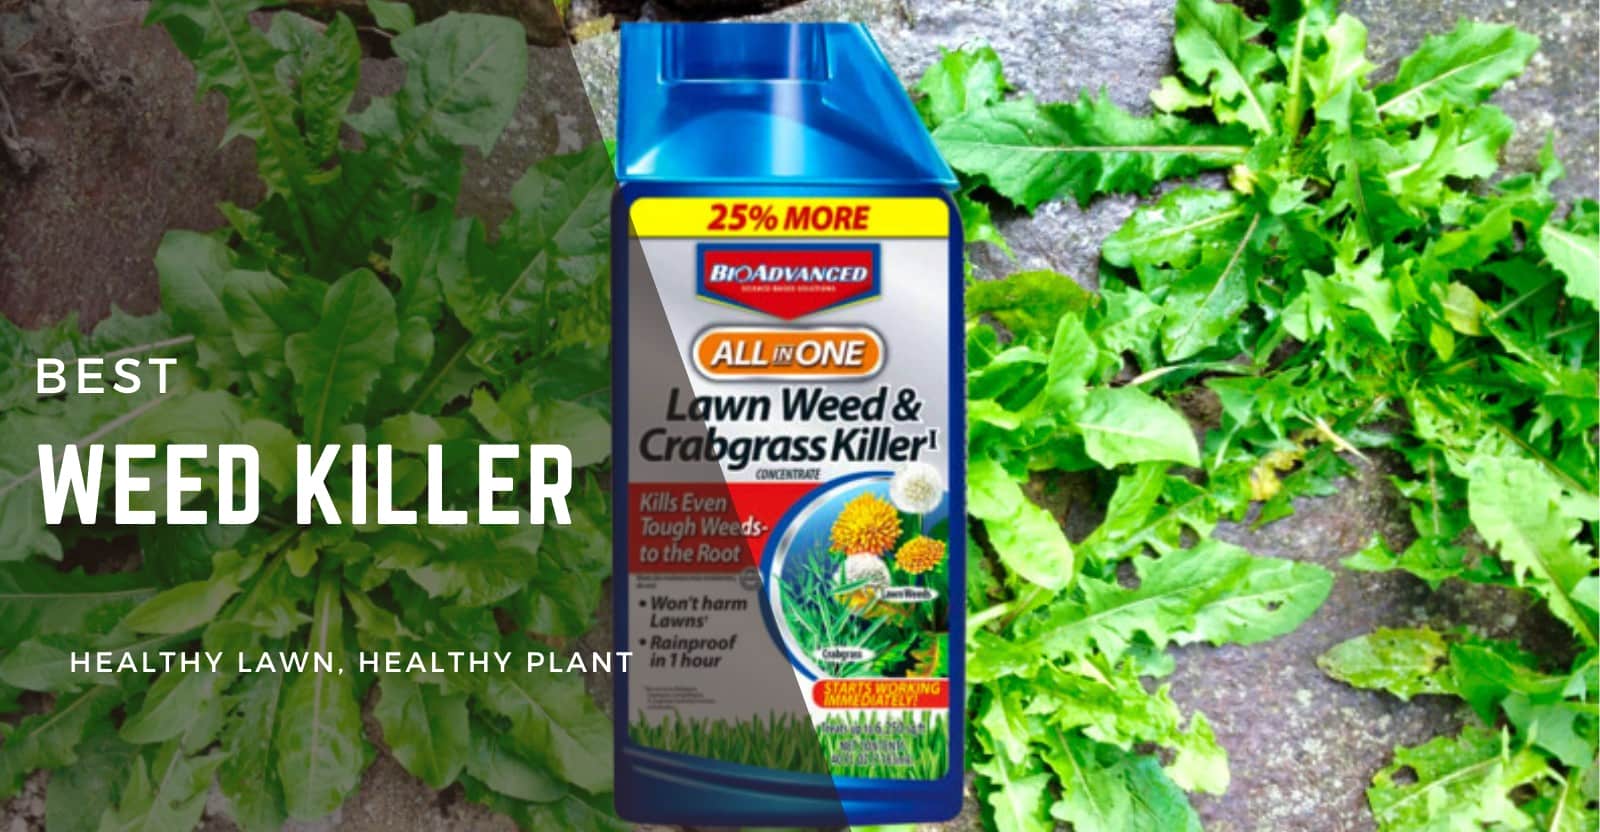 Best Weed Killer for Lawns Review